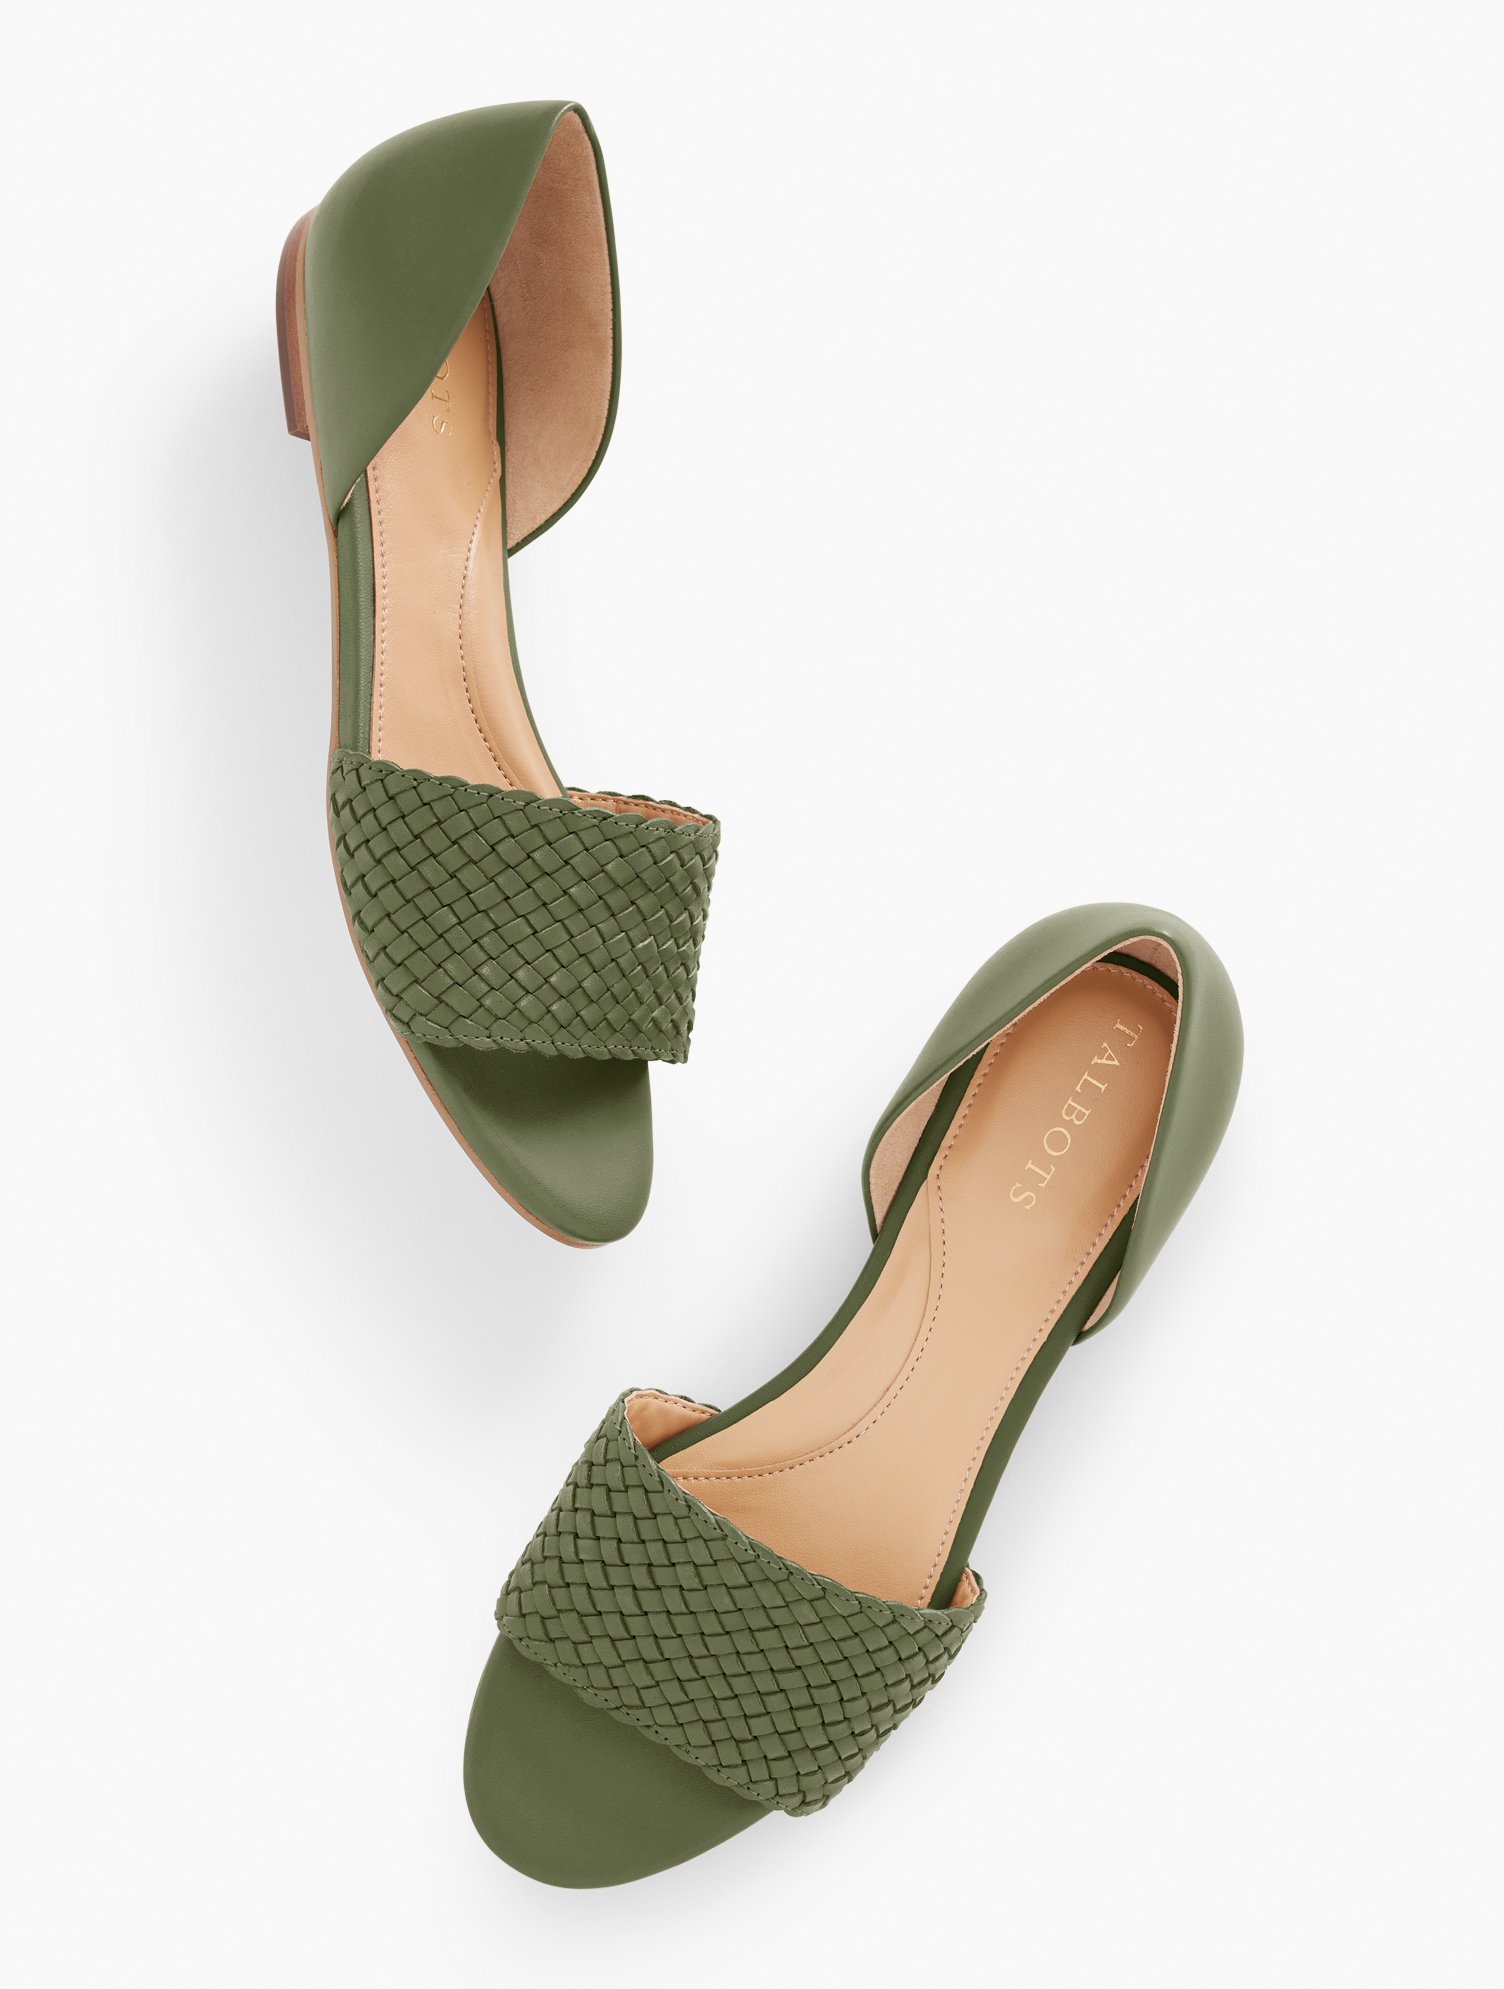 Talbots Leona Woven Leather Sandals - Spring Moss - 11m